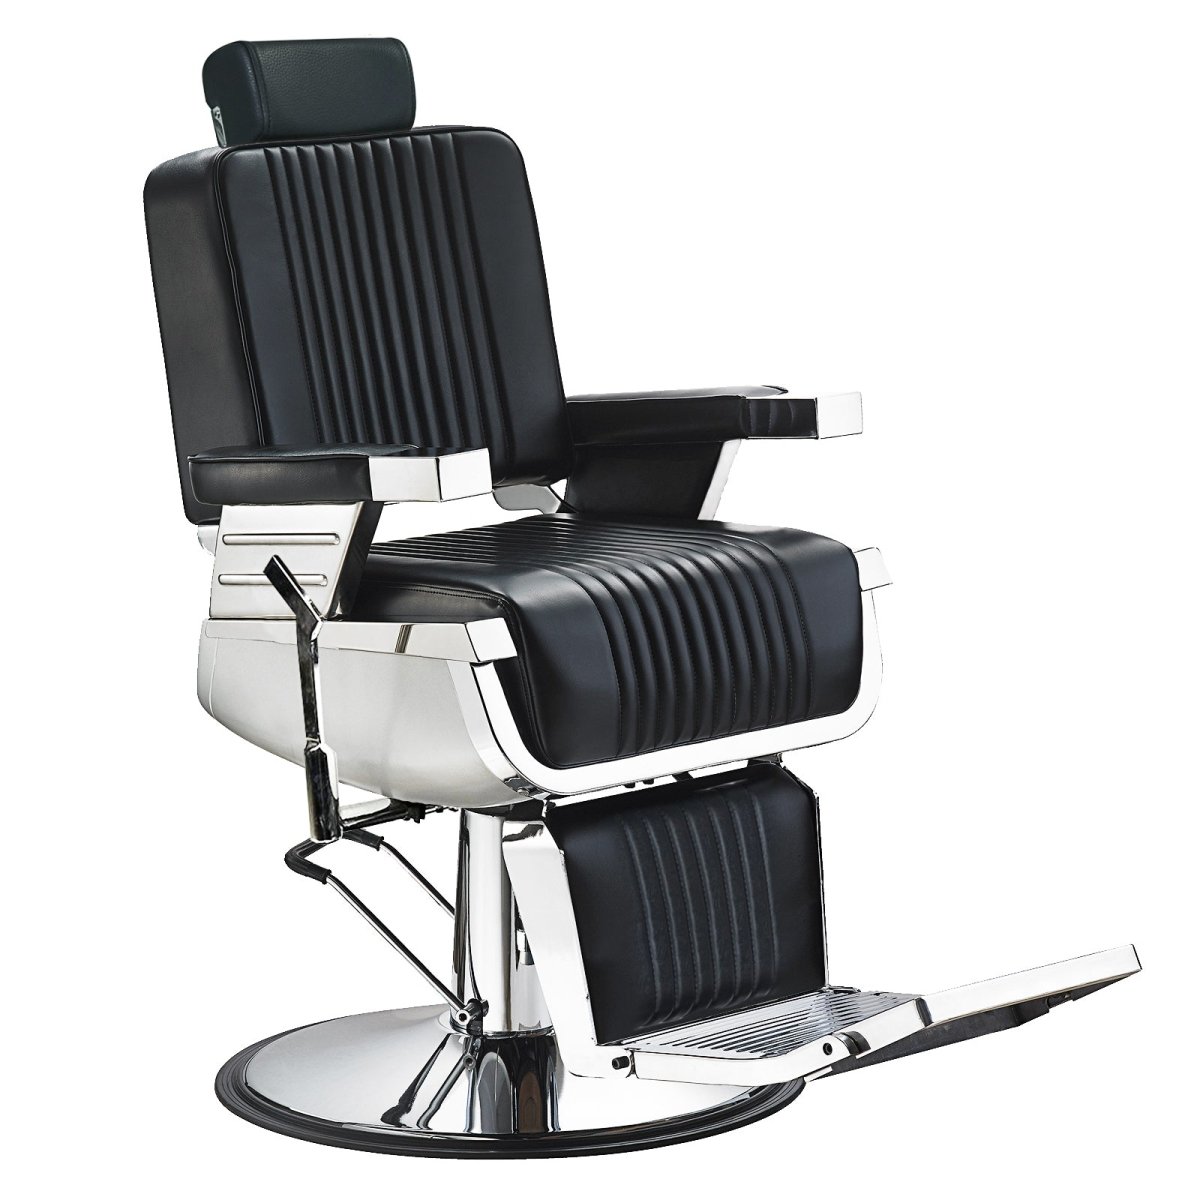 Advance Modern Rotatable Recline Barber Chair - BC 671 - GreenLife-Barber chair